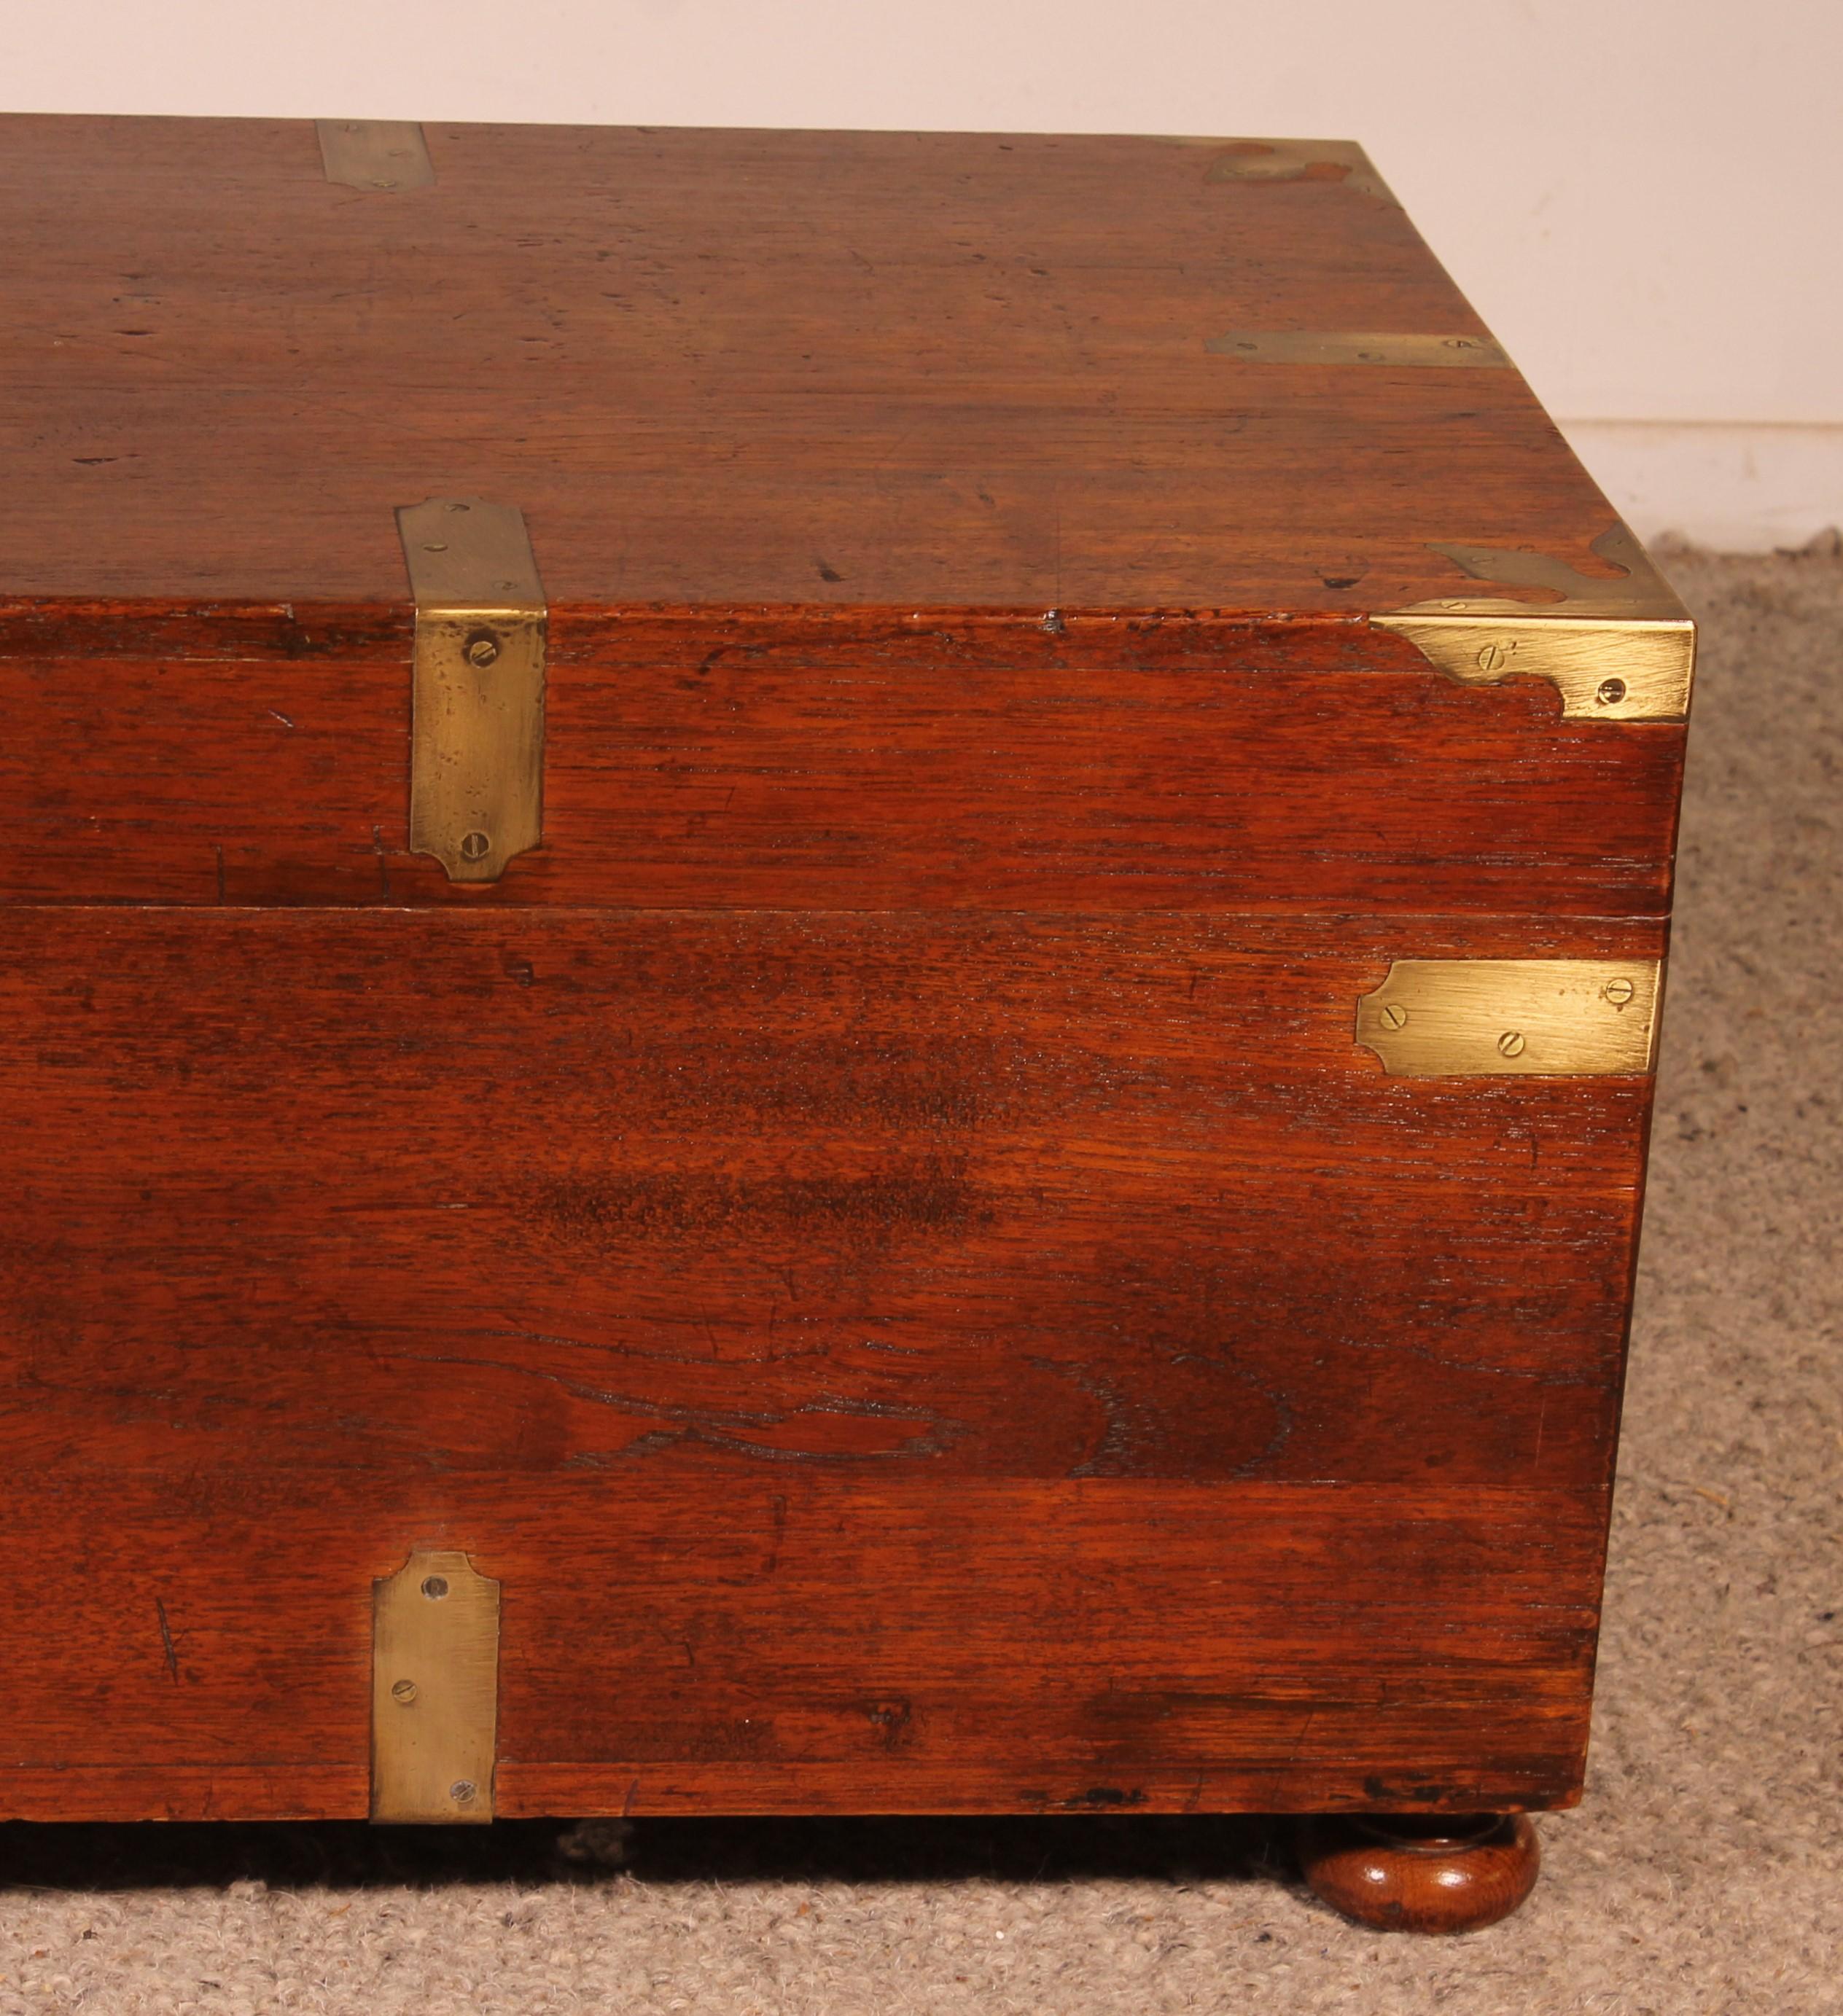 English Teak Campaign Or Marine Chest From The 19th Century